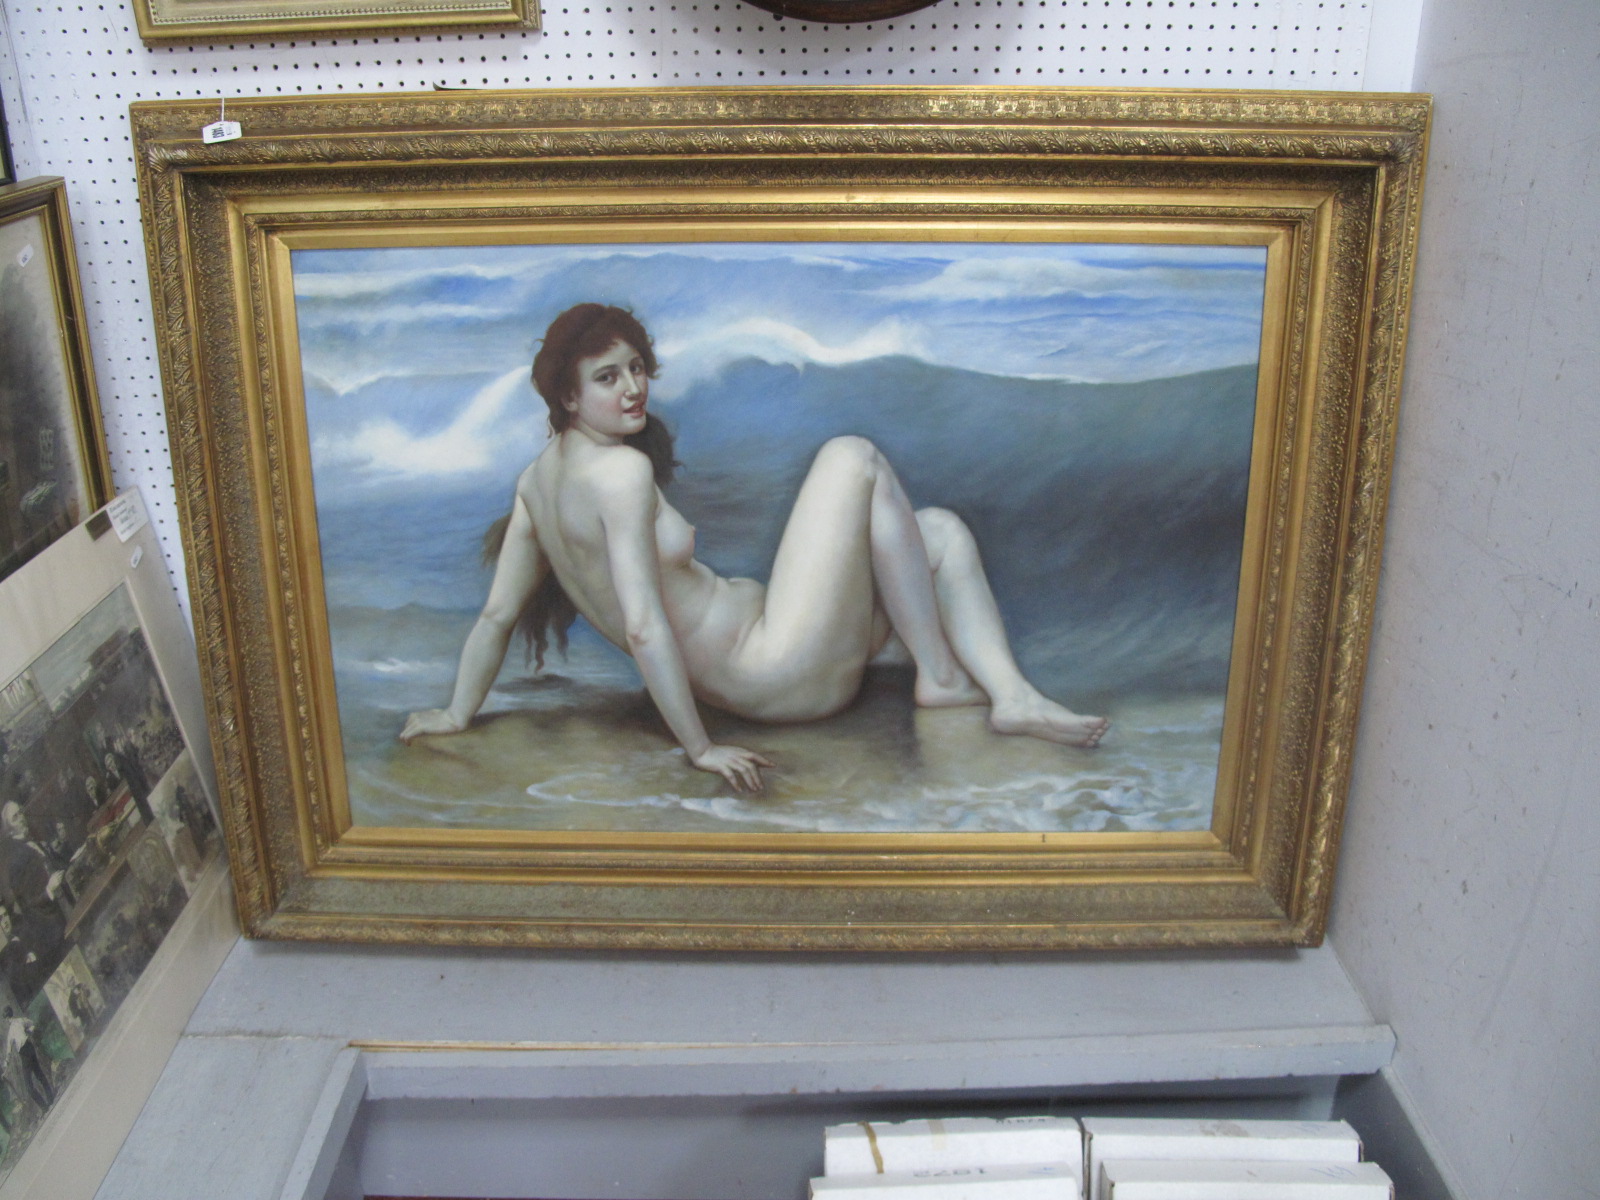 Attr to Thomas Wiston, Study of a Seated Female Nude on Beach, oil on canvas, Nationwide Auctioneers